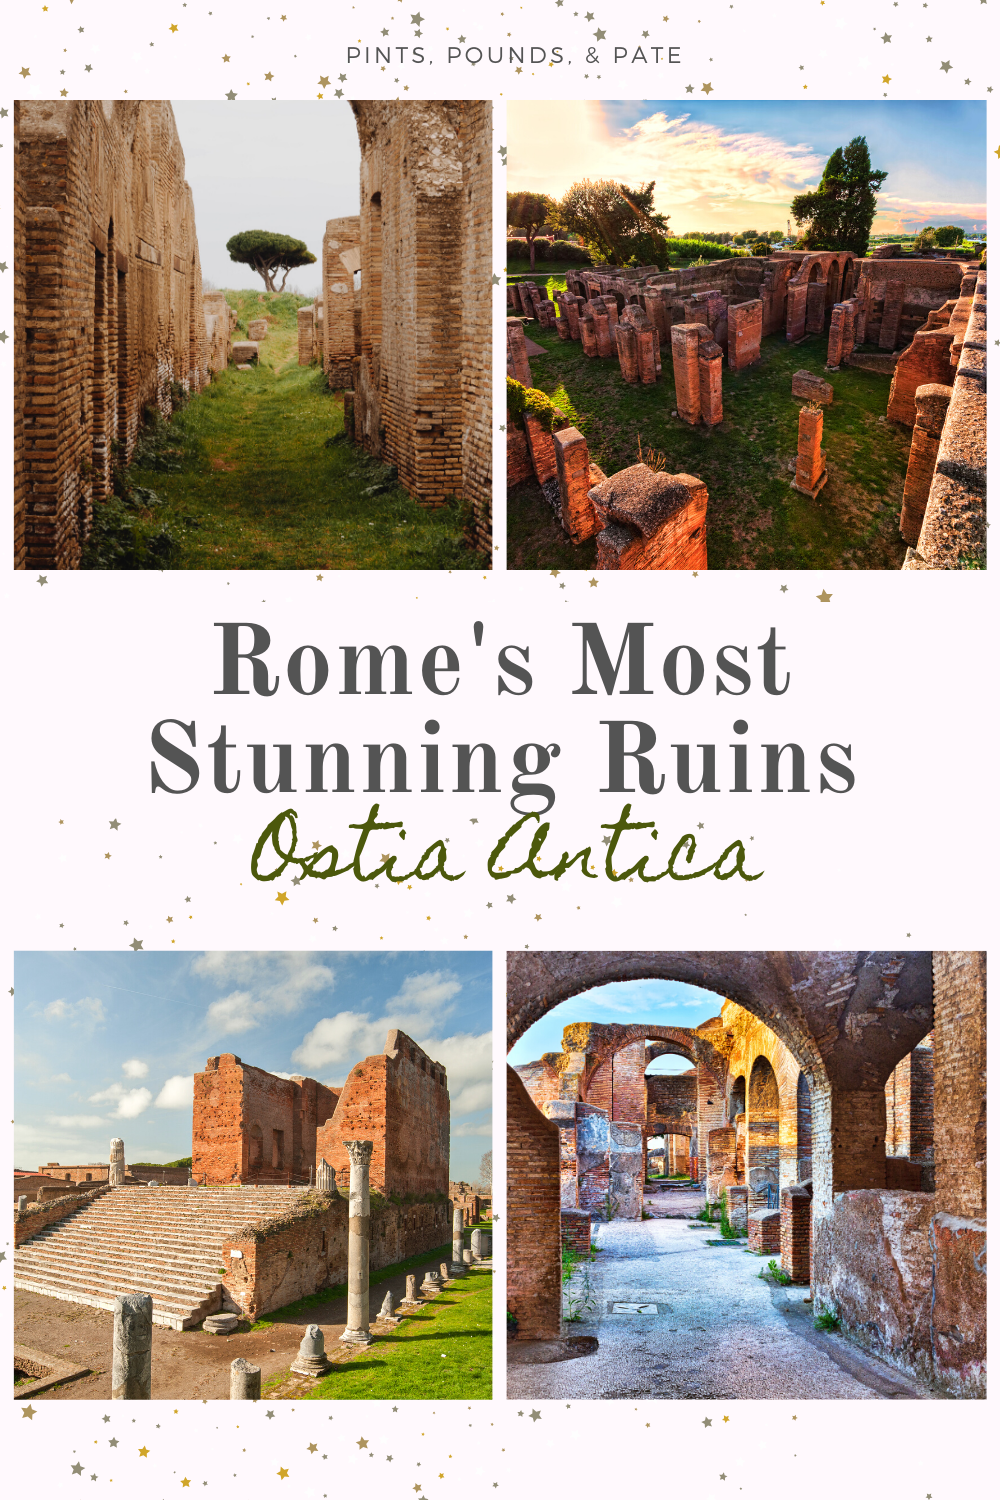 A Day Trip to Osita Antica from Rome